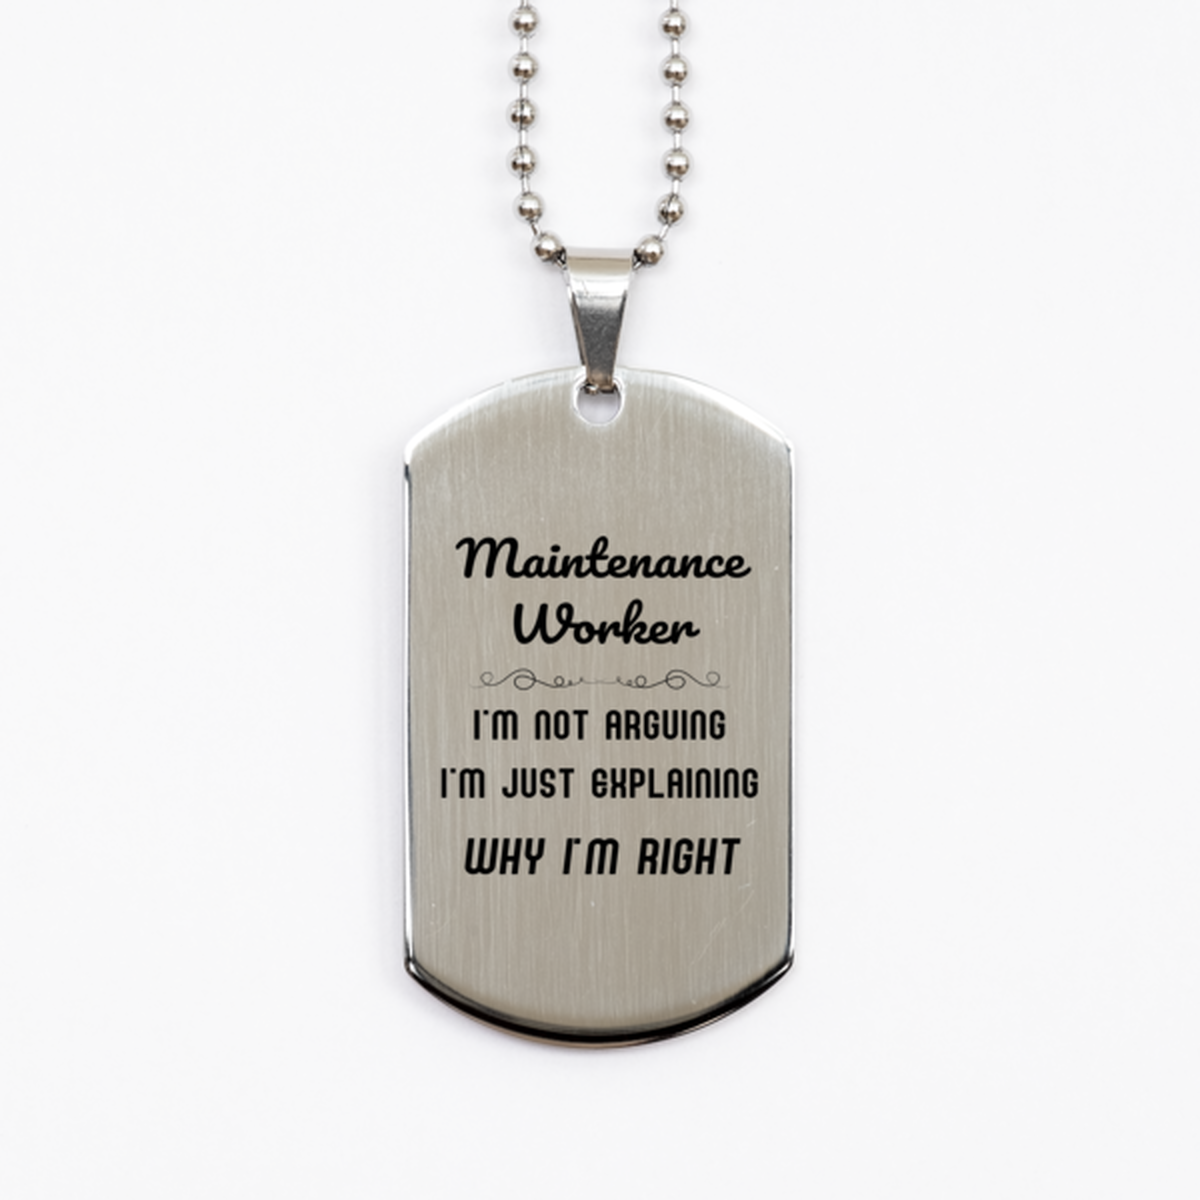 Maintenance Worker I'm not Arguing. I'm Just Explaining Why I'm RIGHT Silver Dog Tag, Funny Saying Quote Maintenance Worker Gifts For Maintenance Worker Graduation Birthday Christmas Gifts for Men Women Coworker